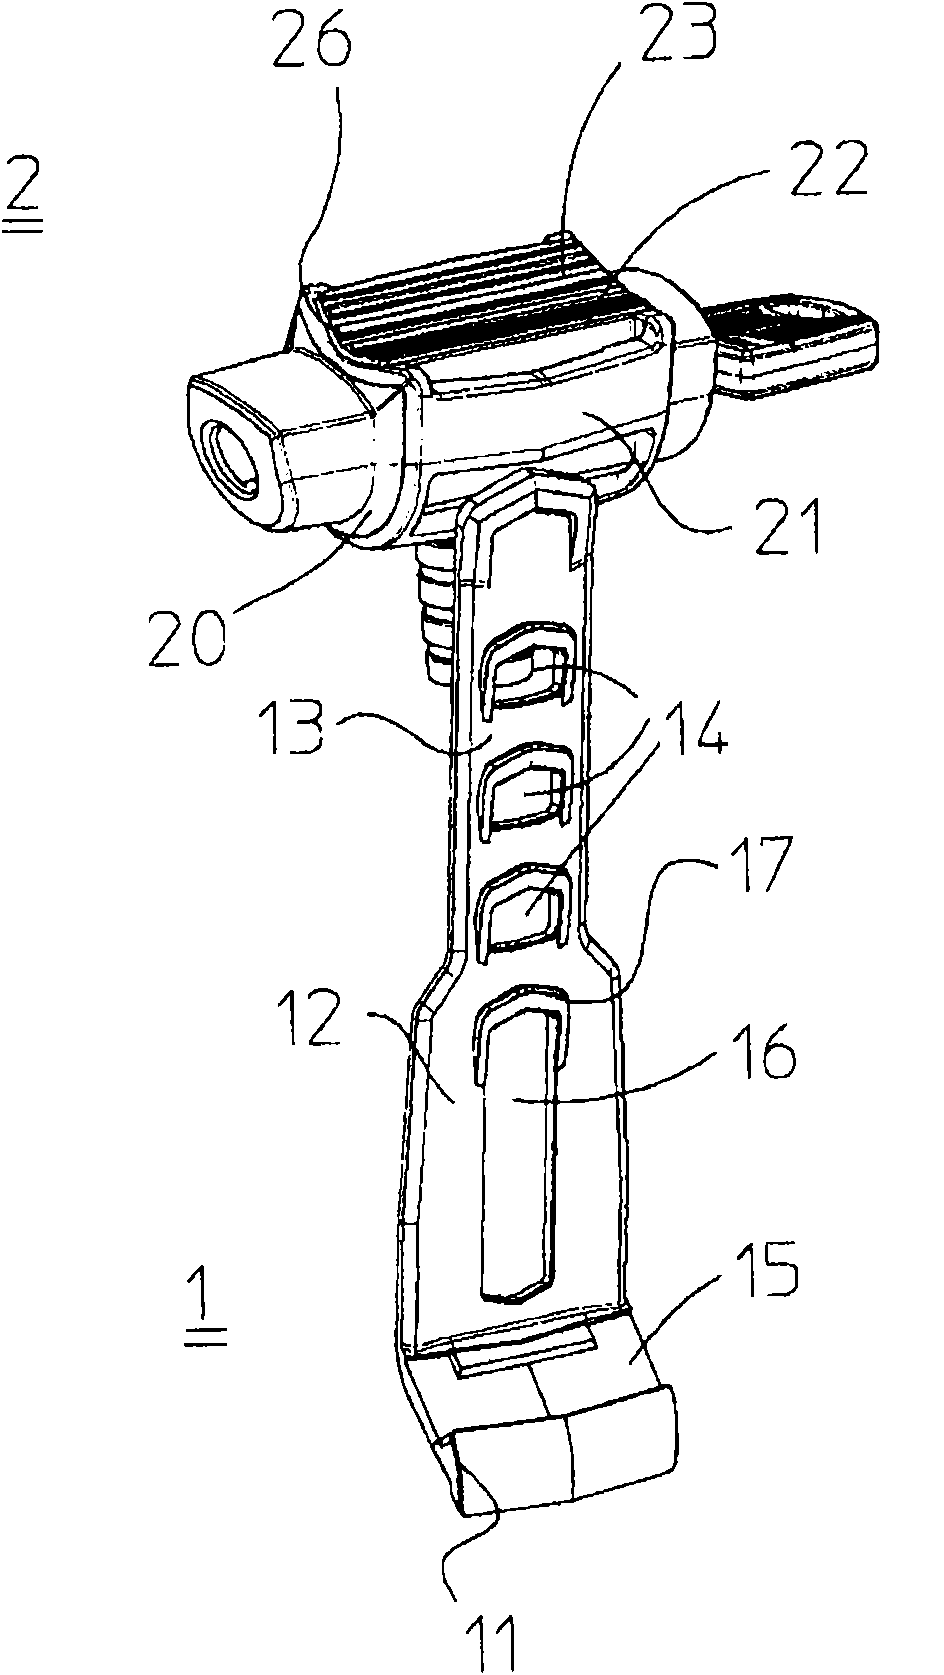 Holder and bicycle lock